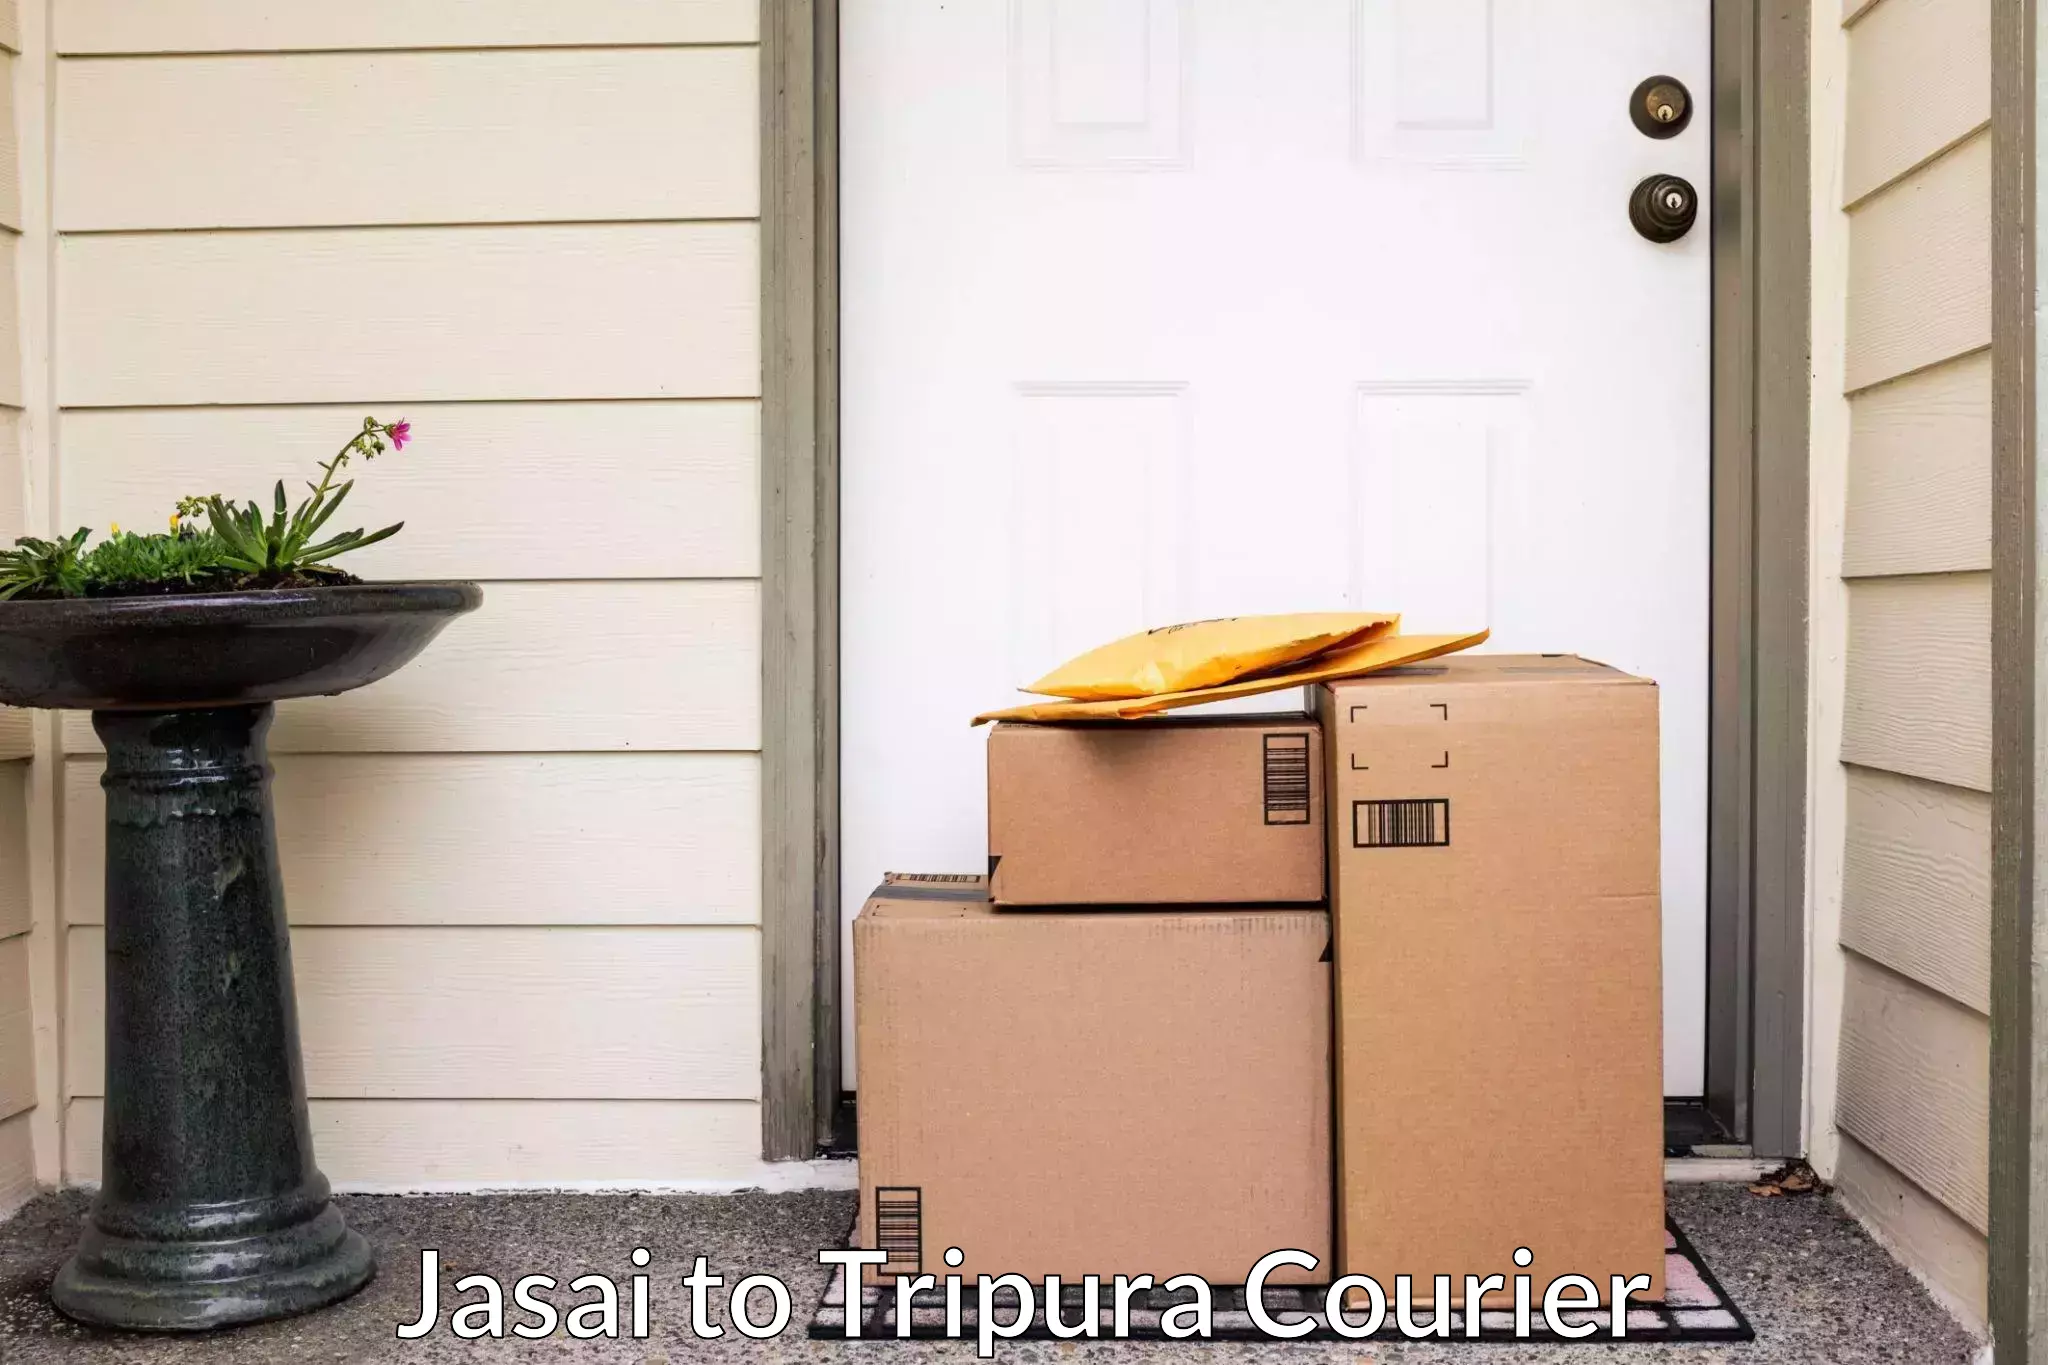 Professional moving company in Jasai to Tripura